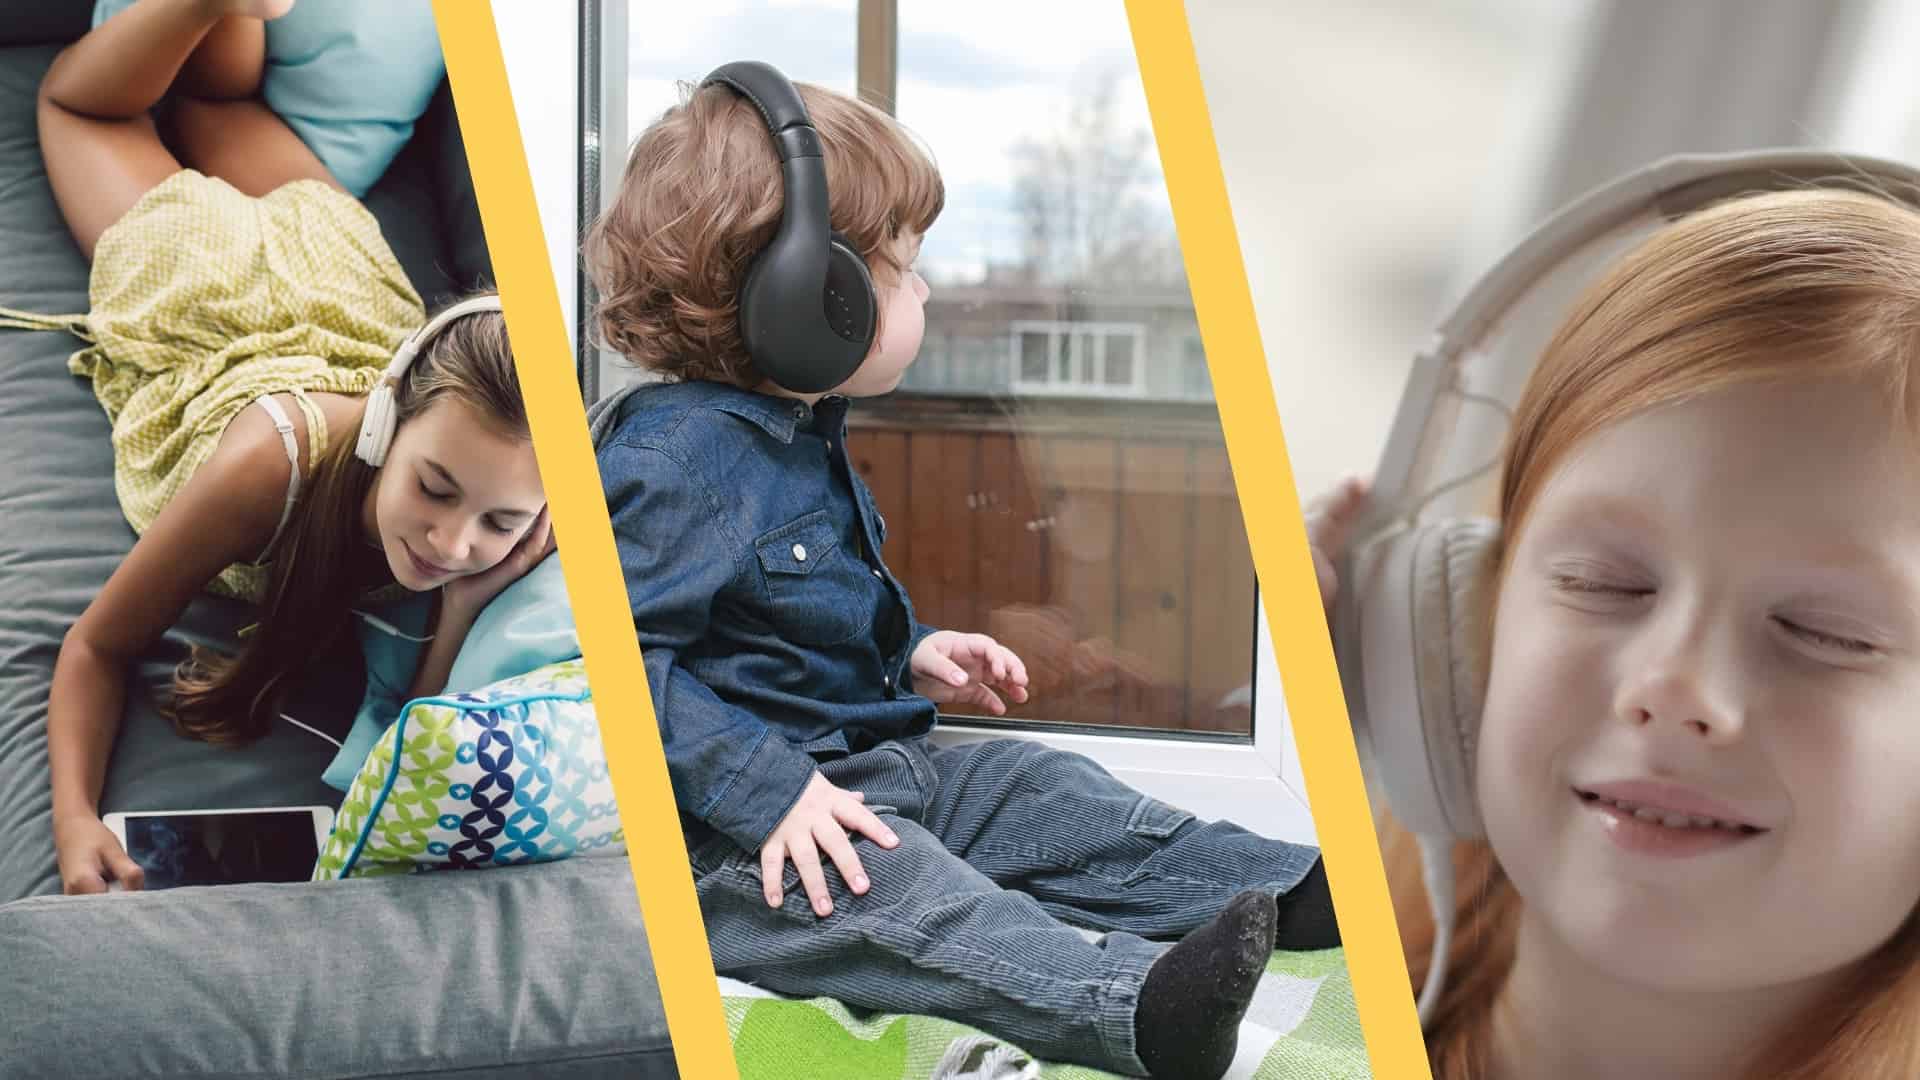 4 best kids headphones reviewed: Check out the best from the test